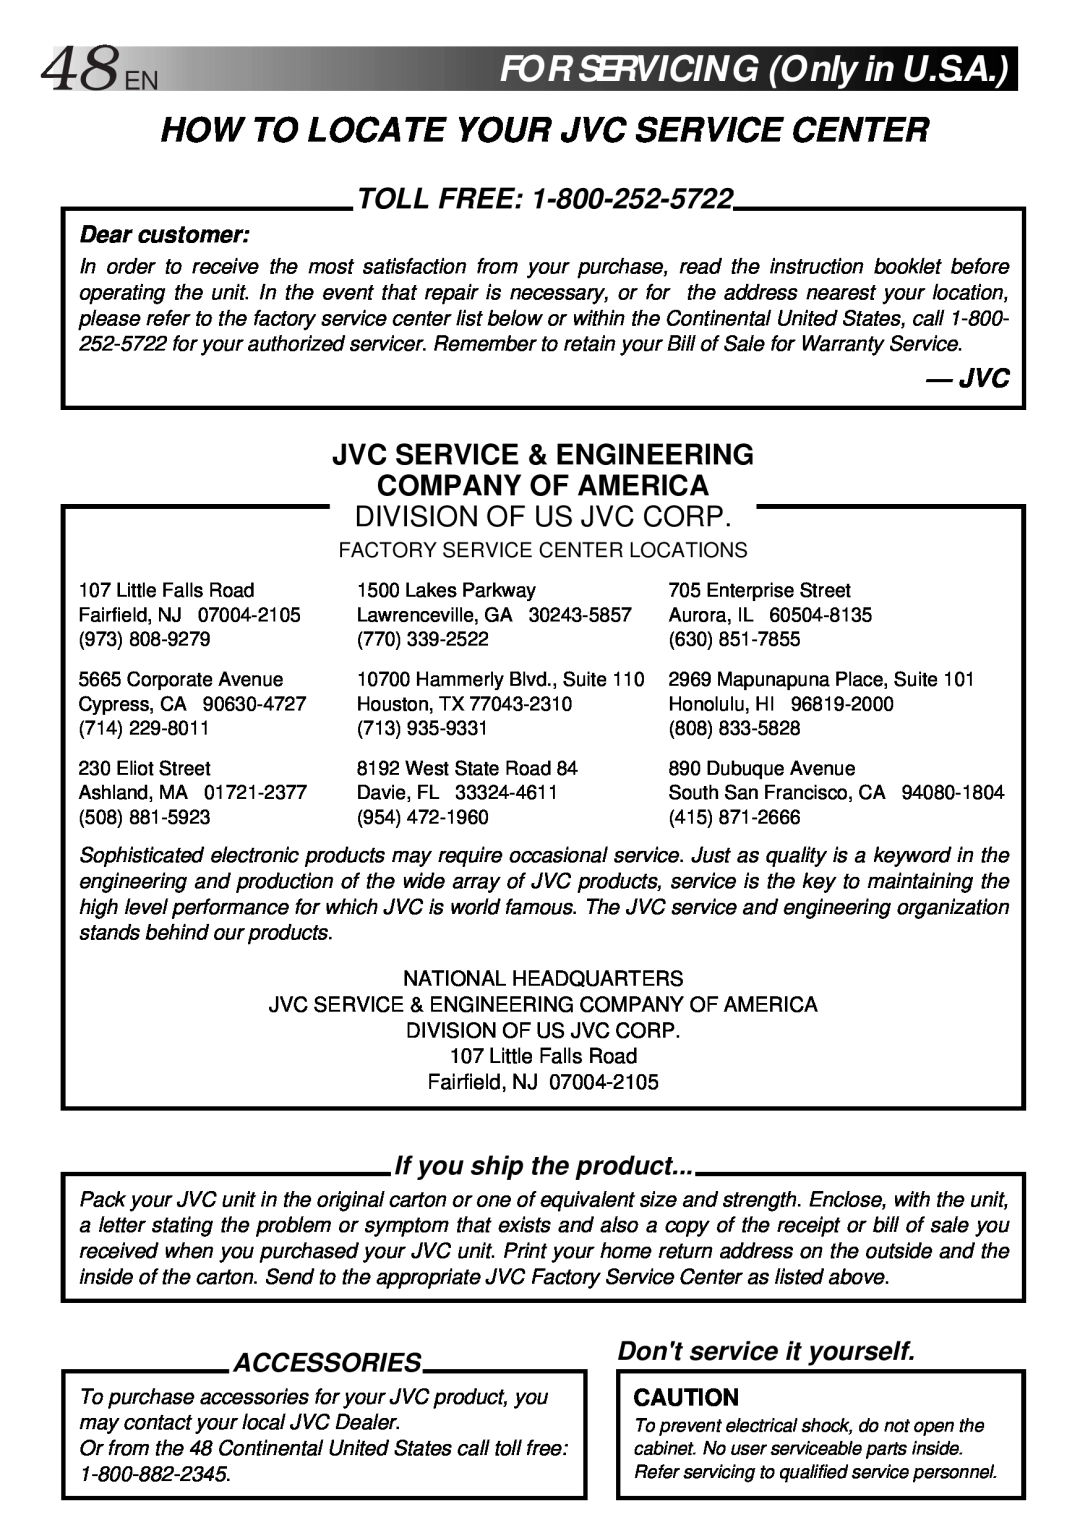 JVC GV-HT1U manual 48ENFORSERVICINGOnlyinU.S.A, How To Locate Your Jvc Service Center, Toll Free, Division Of Us Jvc Corp 